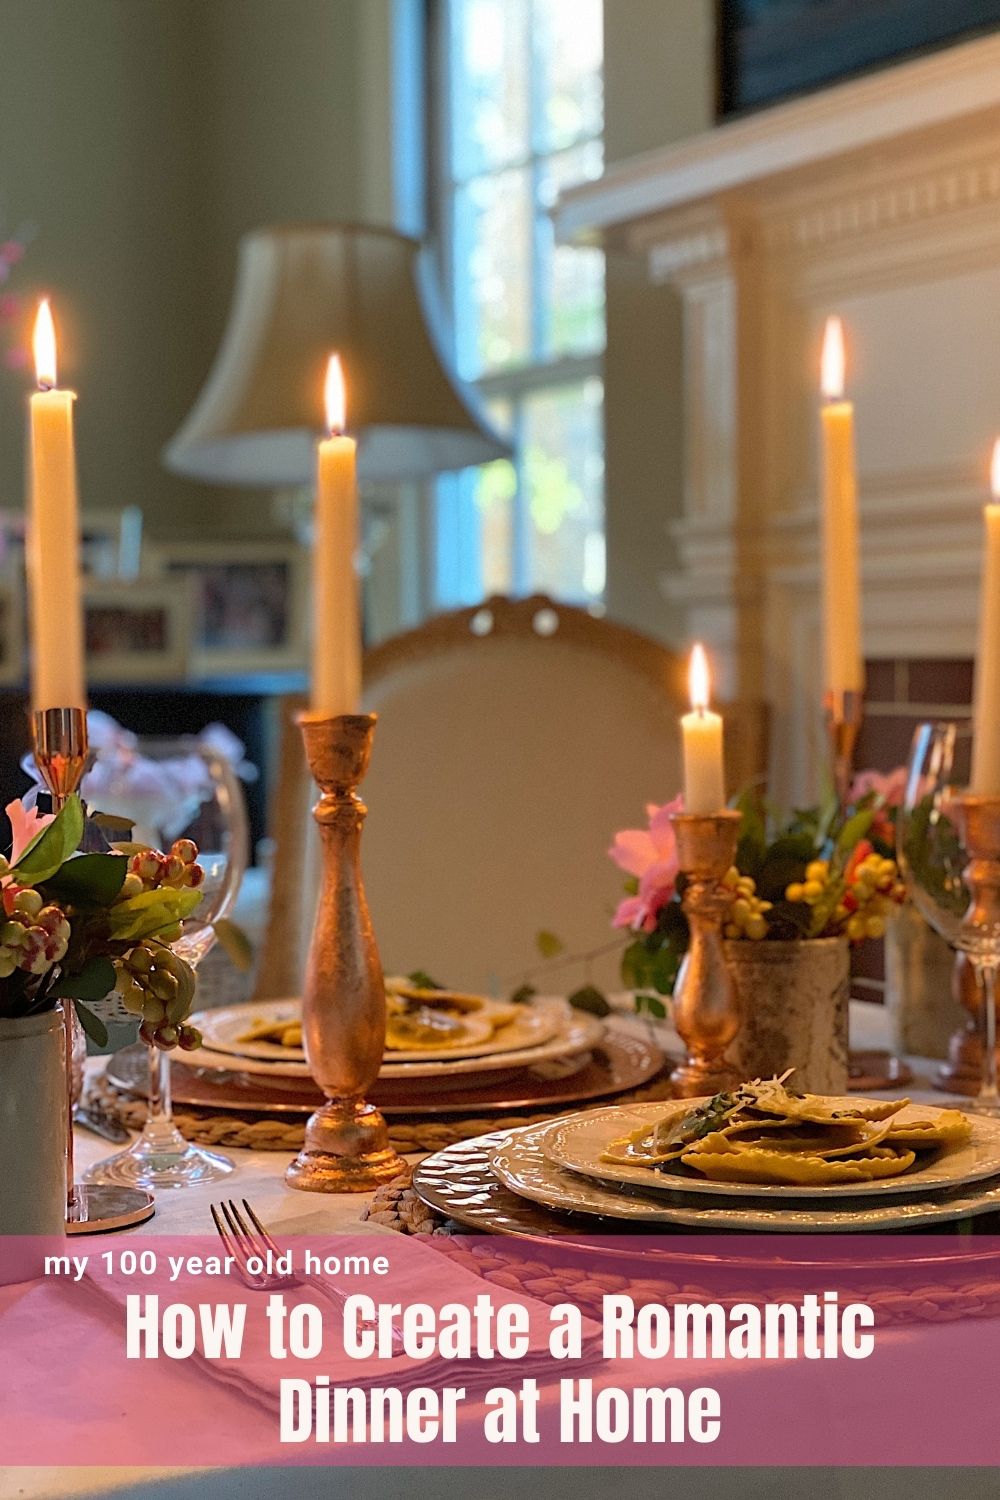 I know it's the middle of the week. But today I am sharing a surprise romantic dinner and my romantic dinner recipes I created for my husband on a Tuesday night.